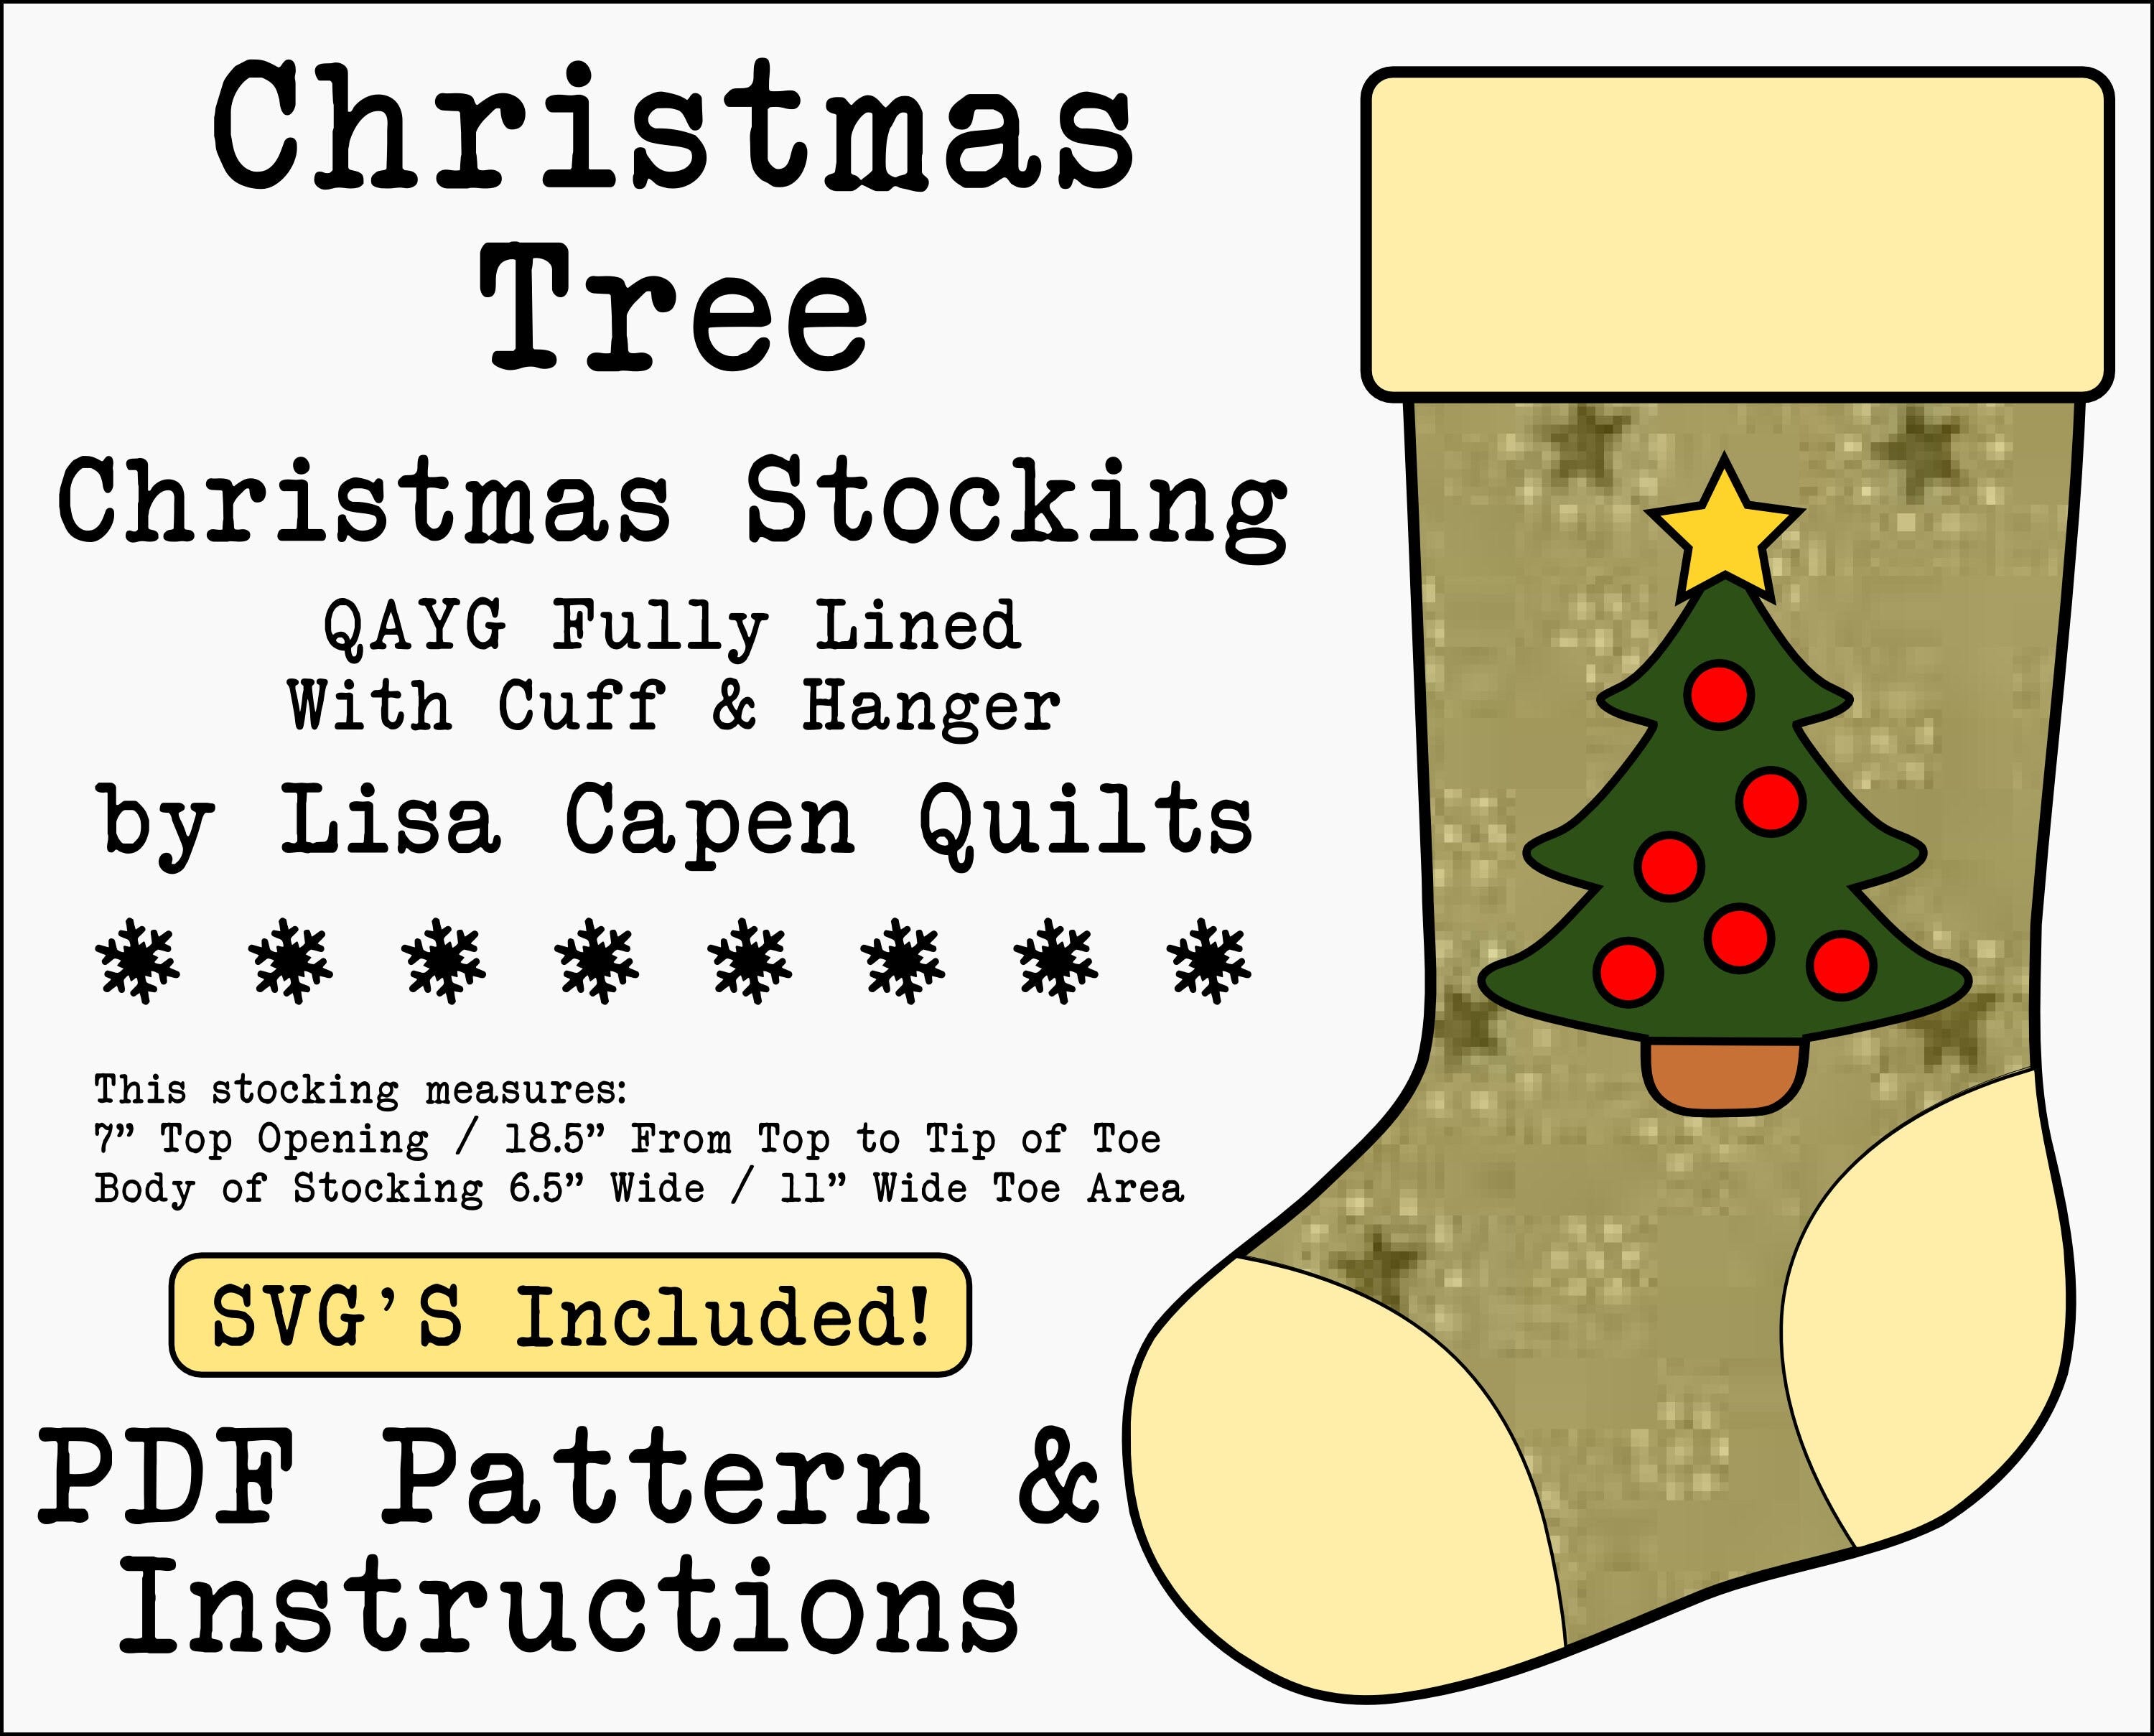 Christmas Tree Quilted Christmas Stocking Pattern - SVGs Included - Applique Templates Included - QAYG - Instant PDF - 7" x 18.5" by LCQ